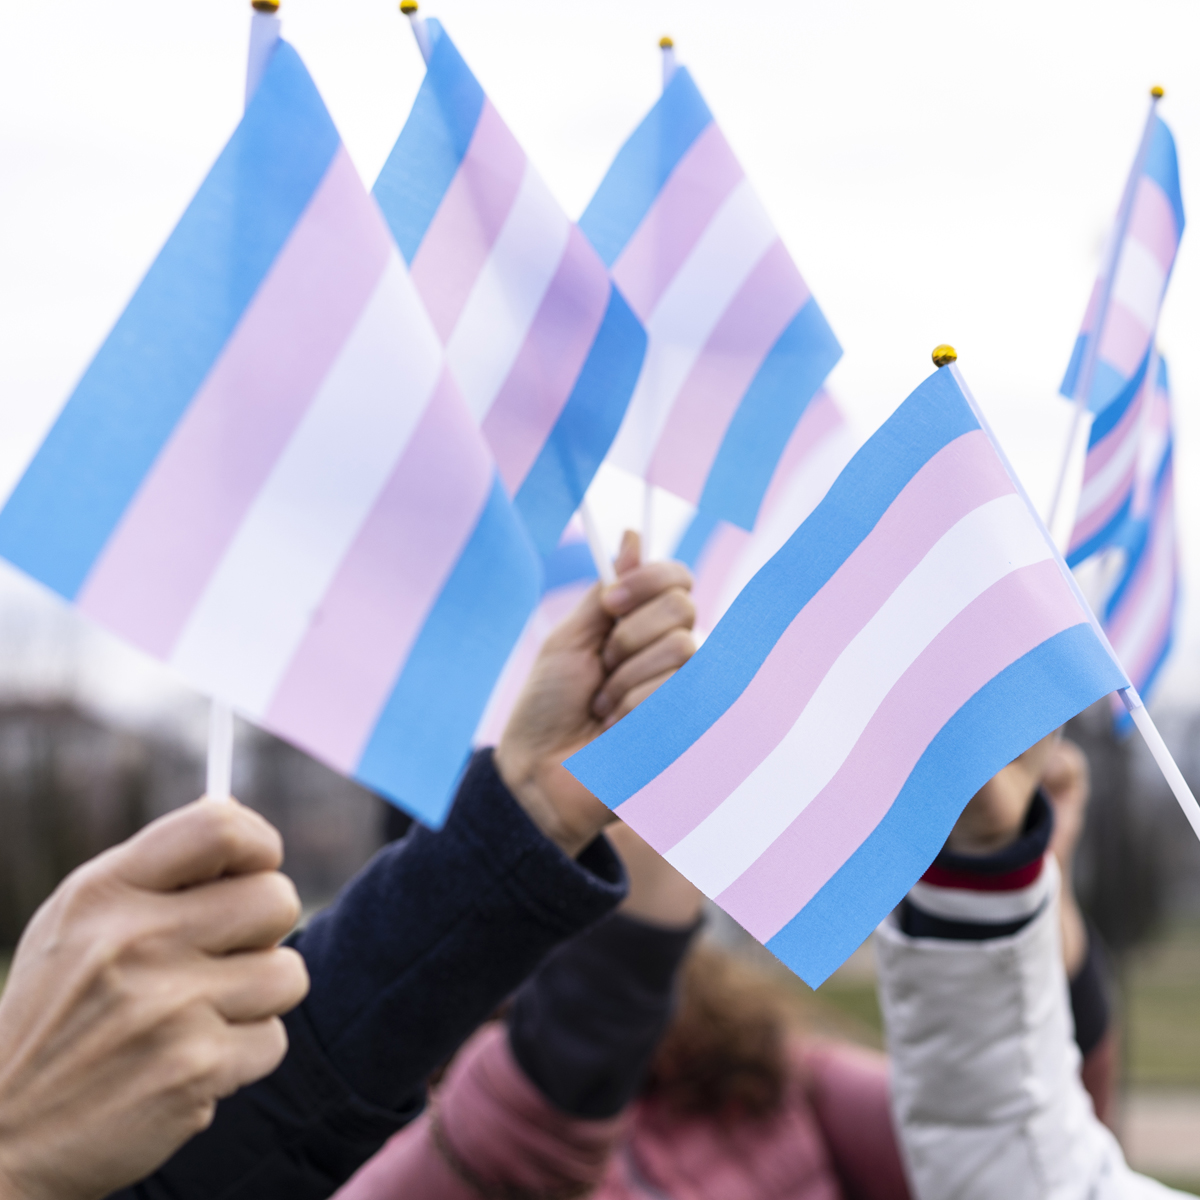 Joint statement – Trans visibility starts by upholding trans human rights